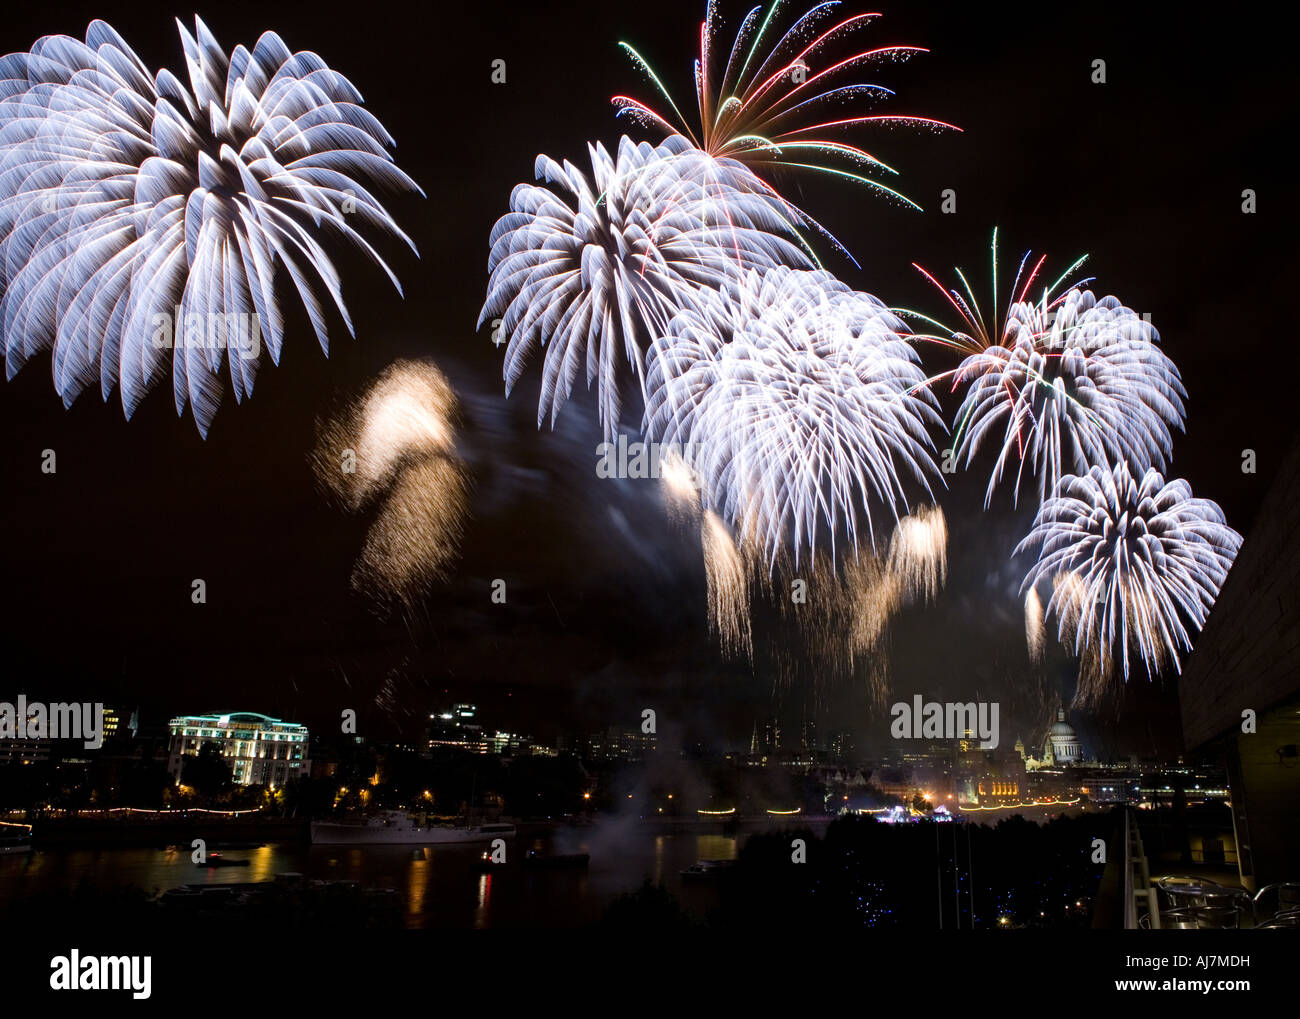 Thames Festival fireworks show in London, England. Stock Photo